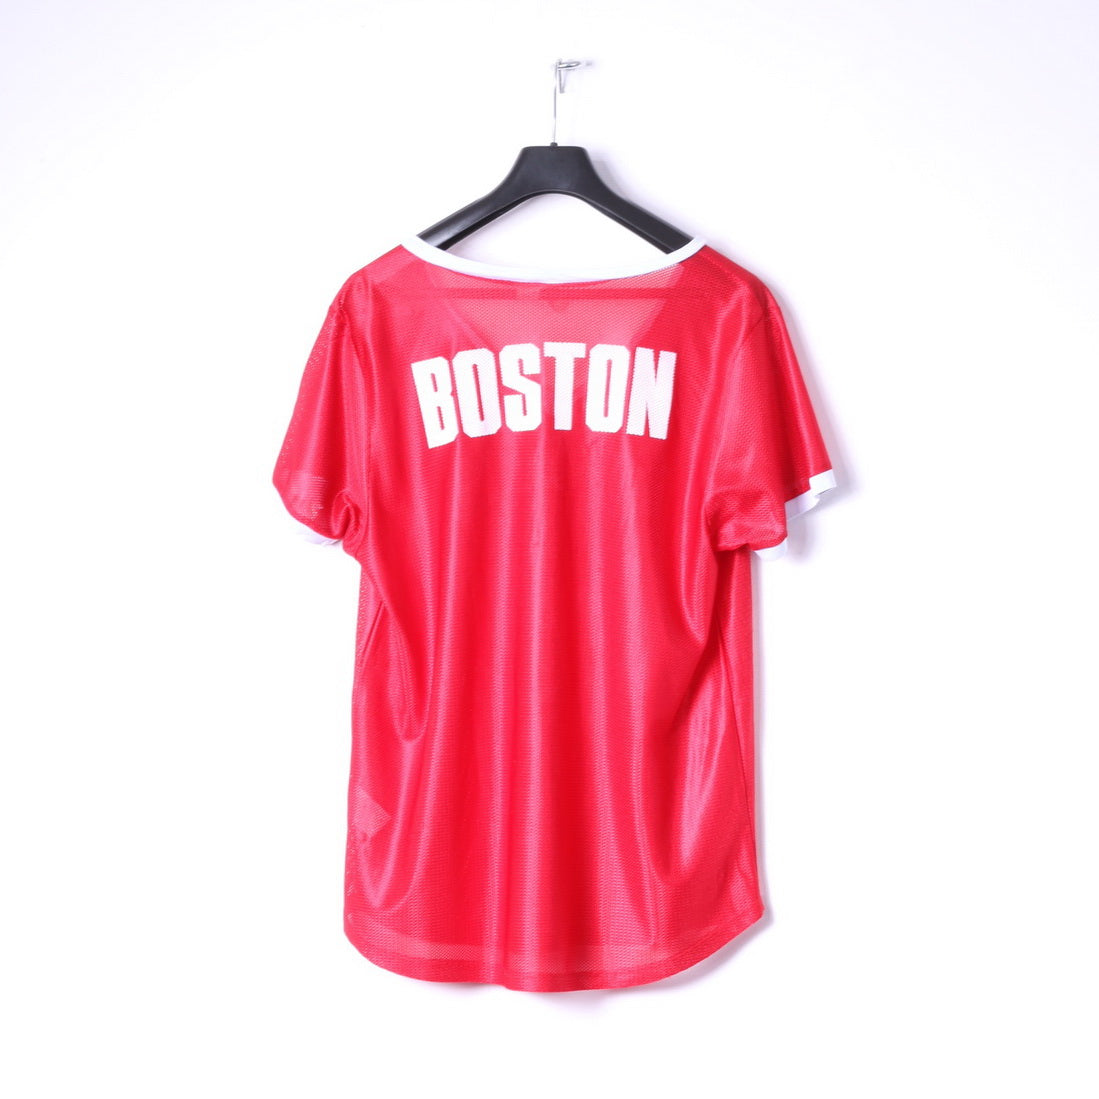 Project Social Mens L Shirt Red Mesh V Neck Boston #17 Jersey Made in USA